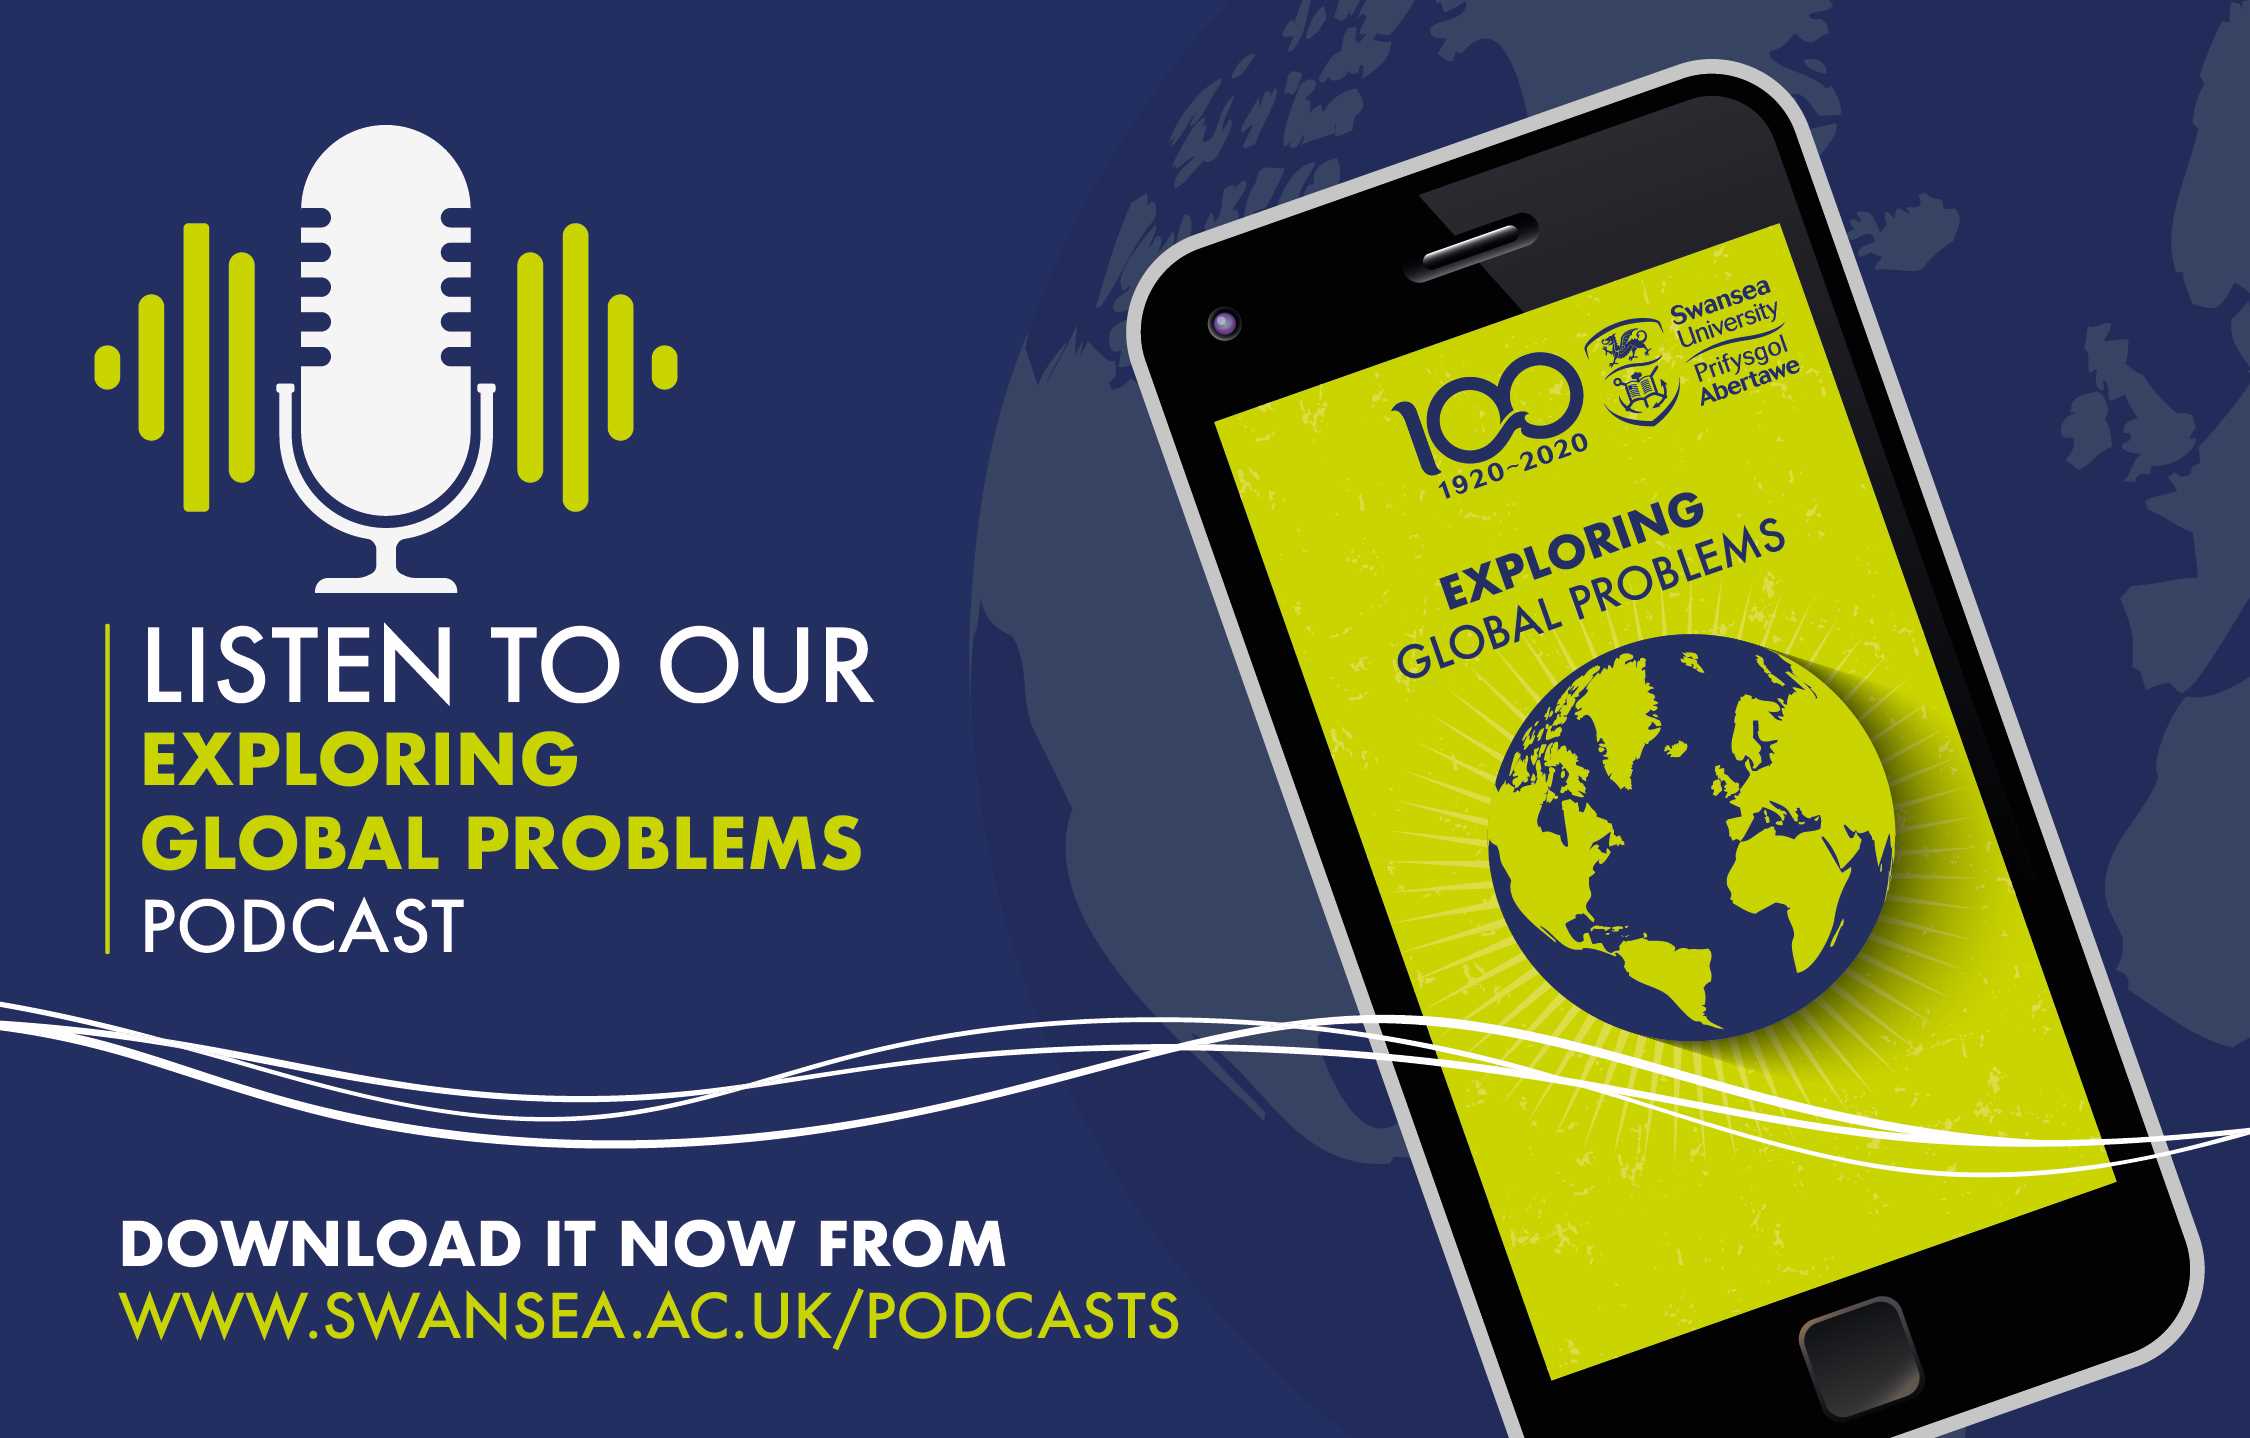 Listen to our Exploring Global Problems podcast